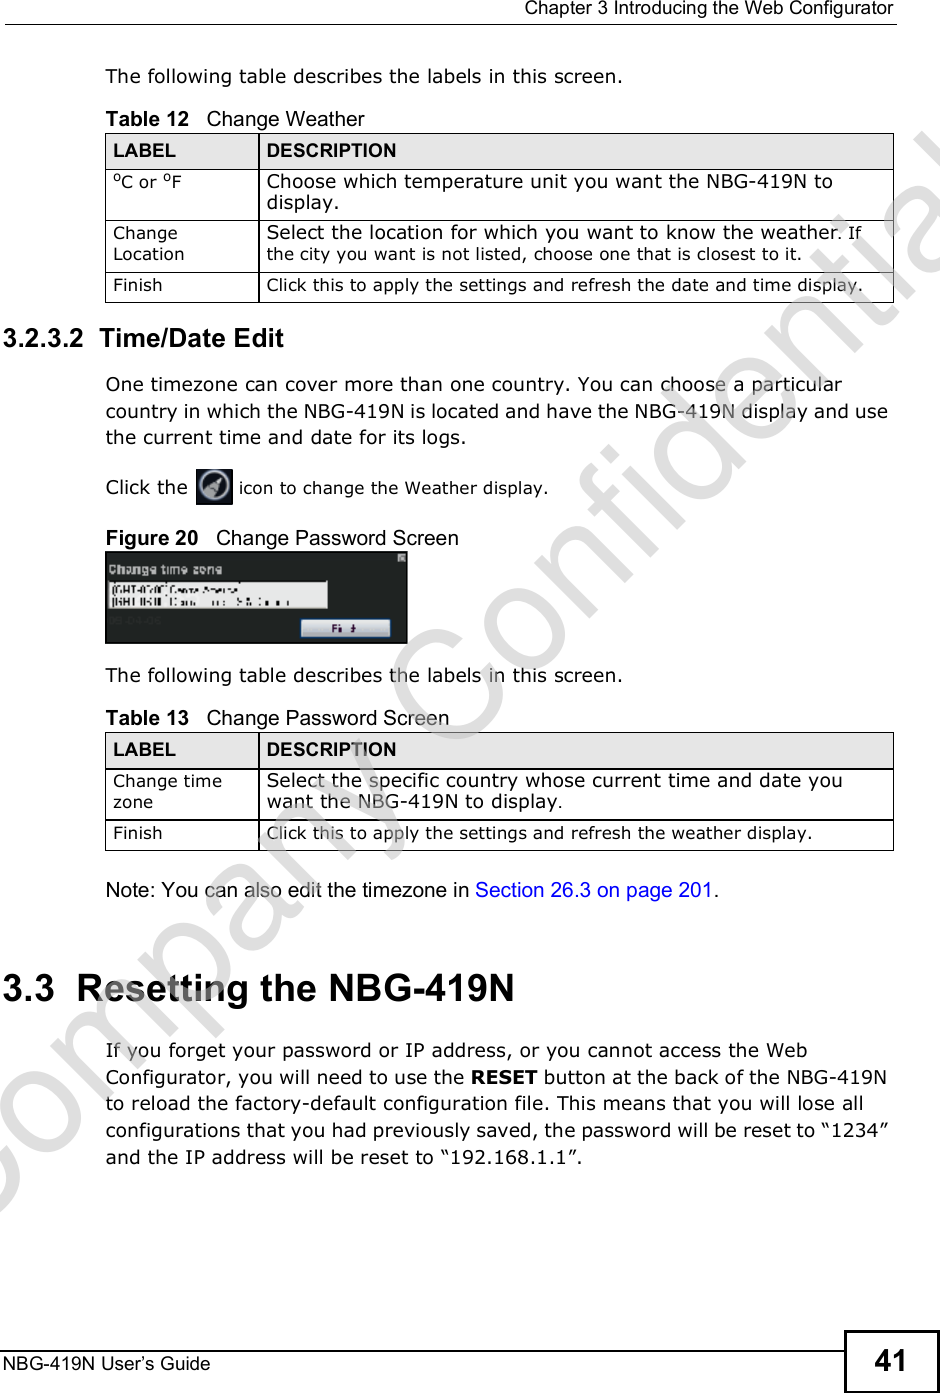  Chapter 3Introducing the Web ConfiguratorNBG-419N User s Guide 41The following table describes the labels in this screen.3.2.3.2  Time/Date EditOne timezone can cover more than one country. You can choose a particular country in which the NBG-419N is located and have the NBG-419N display and use the current time and date for its logs.  Click the   icon to change the Weather display.Figure 20   Change Password ScreenThe following table describes the labels in this screen.Note: You can also edit the timezone in Section 26.3 on page 201.3.3  Resetting the NBG-419NIf you forget your password or IP address, or you cannot access the Web Configurator, you will need to use the RESET button at the back of the NBG-419N to reload the factory-default configuration file. This means that you will lose all configurations that you had previously saved, the password will be reset to &quot;1234# and the IP address will be reset to &quot;192.168.1.1#.Table 12   Change WeatherLABEL DESCRIPTIONoC or oF  Choose which temperature unit you want the NBG-419N to display. Change LocationSelect the location for which you want to know the weather. If the city you want is not listed, choose one that is closest to it.Finish Click this to apply the settings and refresh the date and time display.Table 13   Change Password ScreenLABEL DESCRIPTIONChange time zoneSelect the specific country whose current time and date you want the NBG-419N to display.Finish Click this to apply the settings and refresh the weather display.Company Confidential